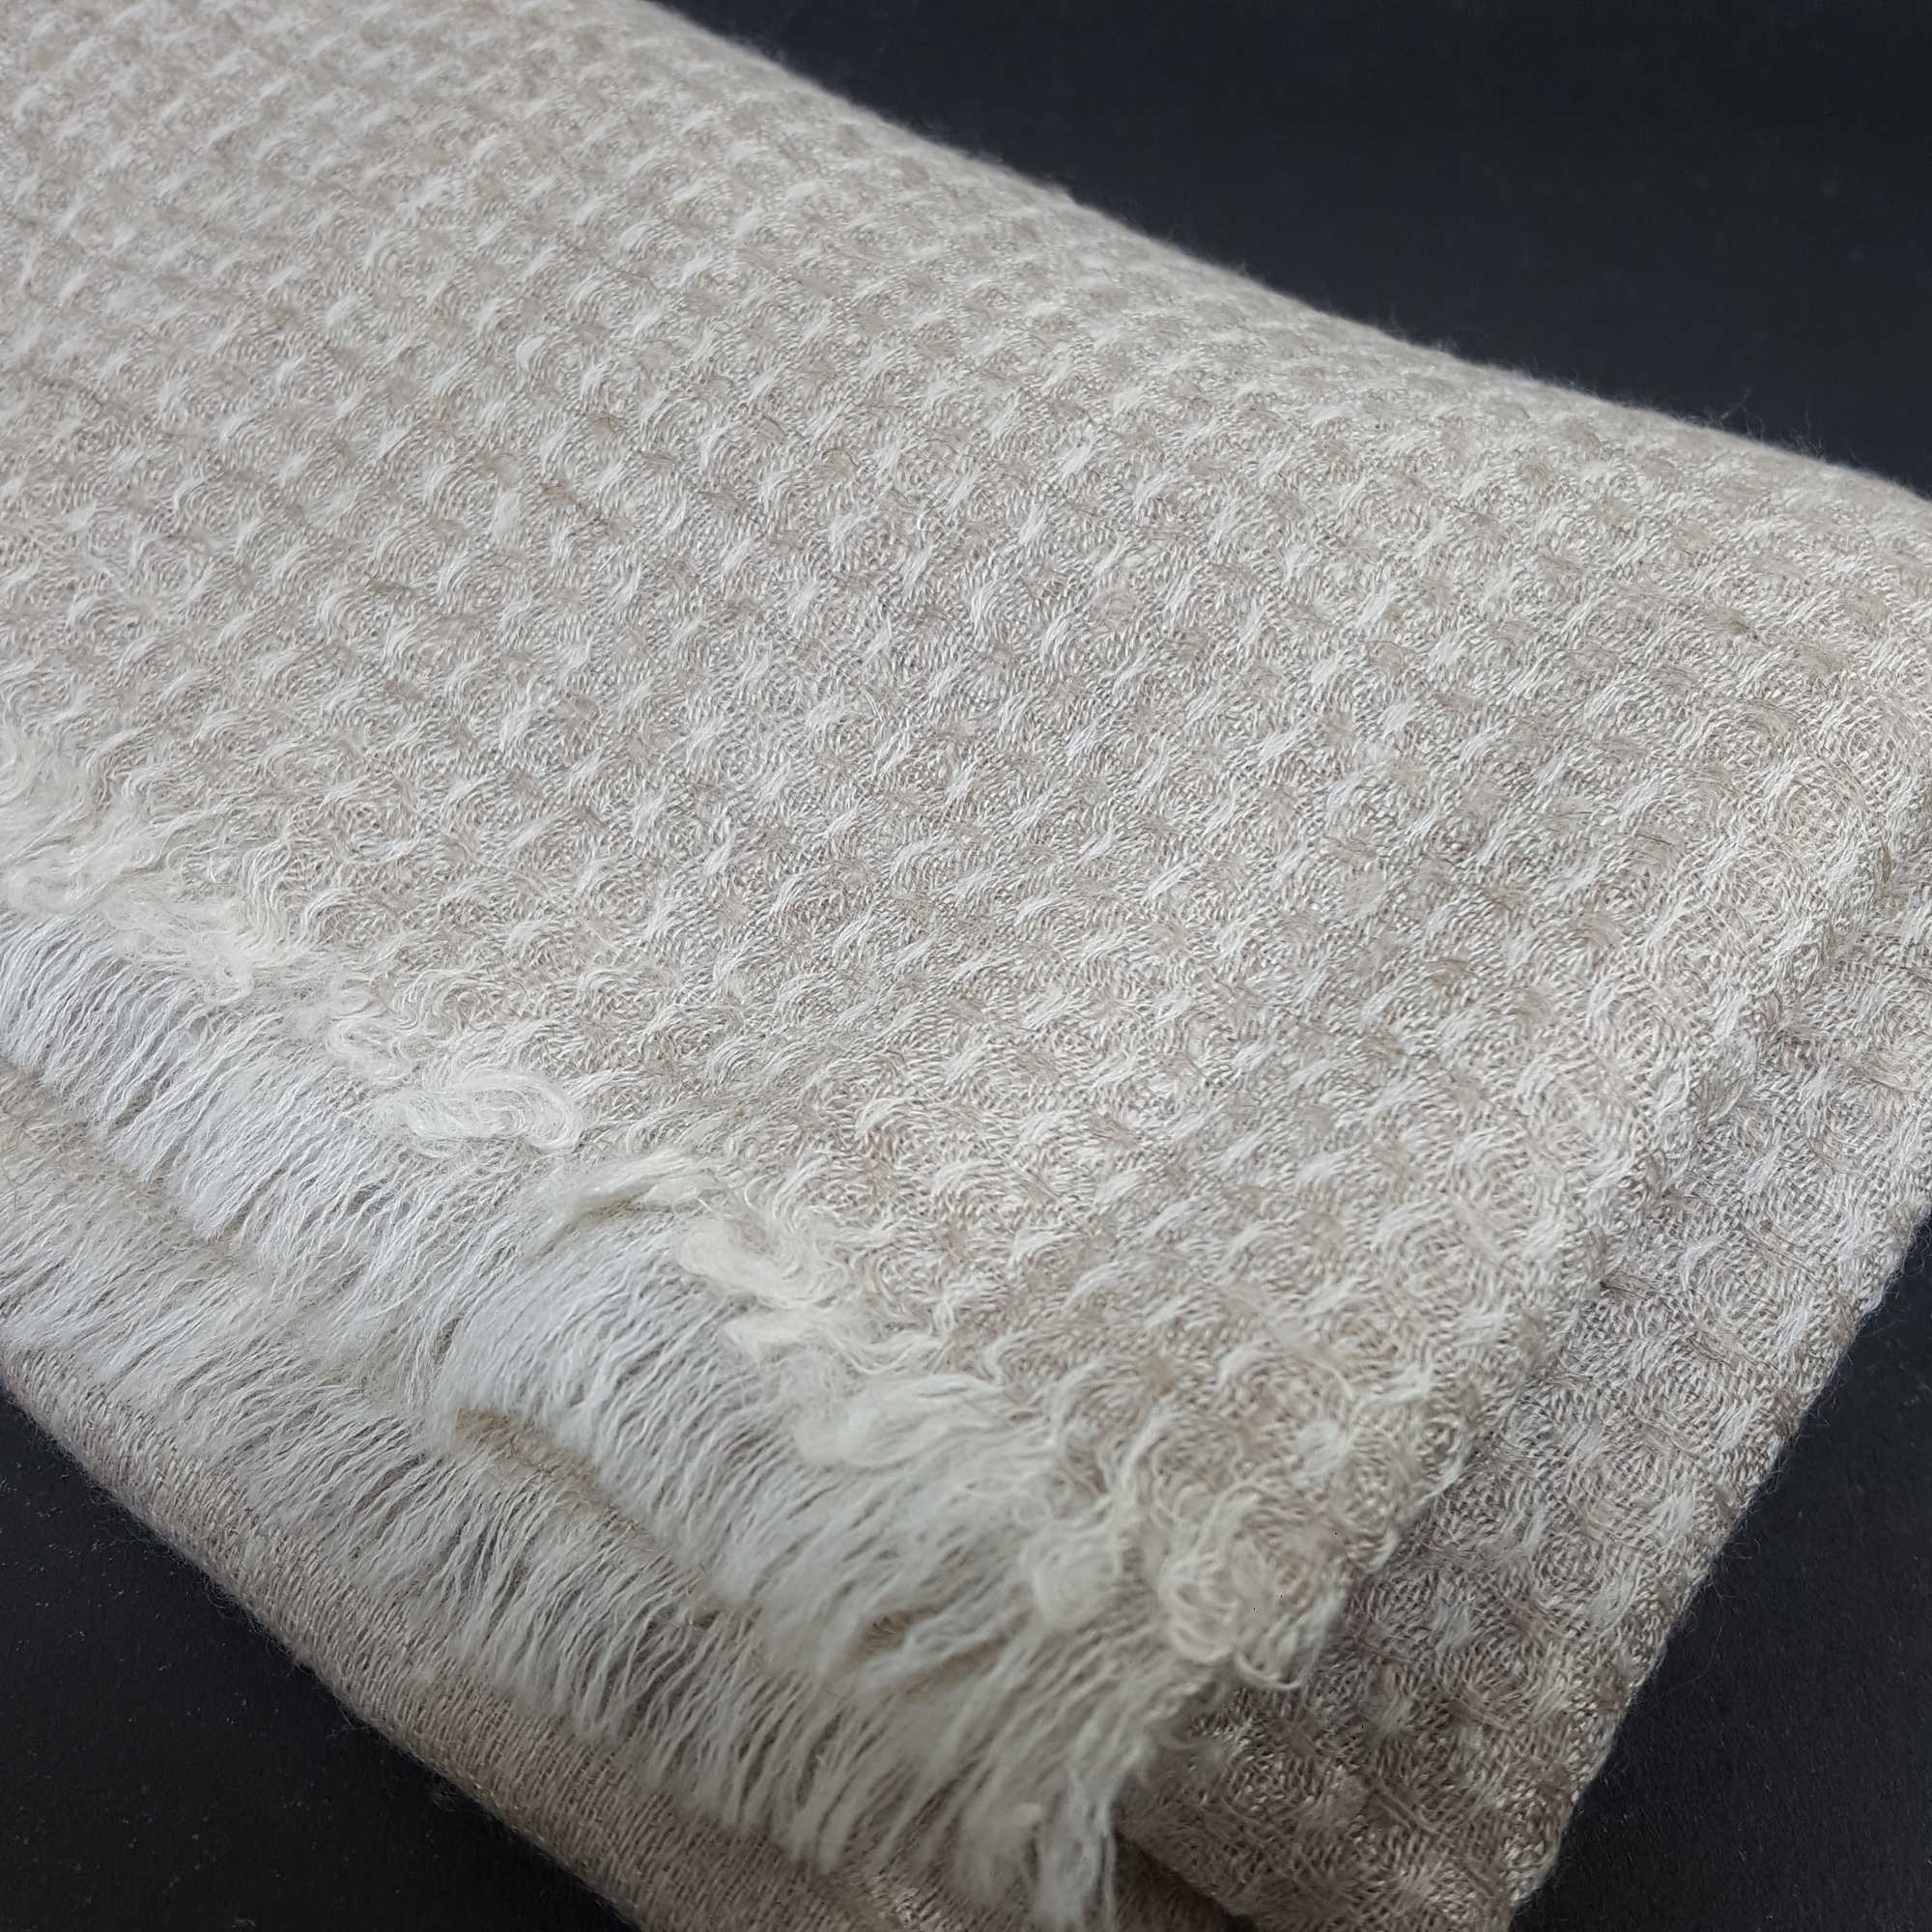 Ring Shawl hq,a Thin, Soft, And Light Shawl For All-weather Use, Two-ply Wool, Real Pashmina Wool, Natural Color, Jakarta Pattern